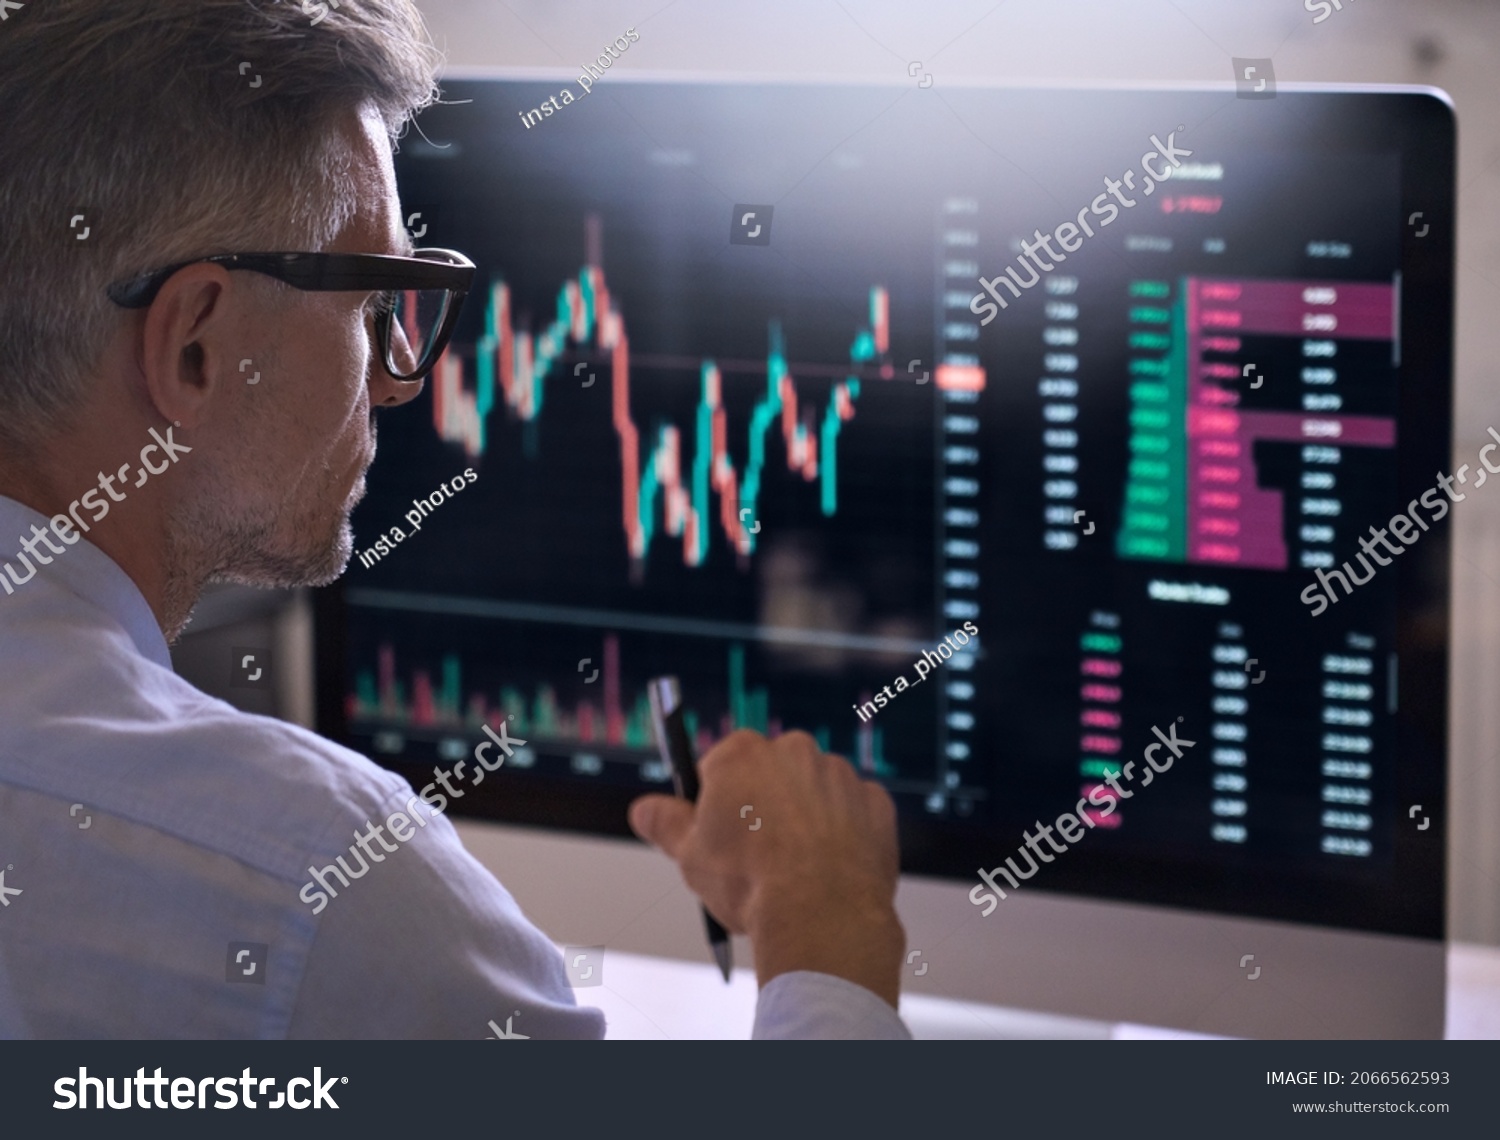 Crypto trader investor analyst broker using pc computer analyzing online cryptocurrency exchange stock market indexes charts investing money profit in trading platform stockmarket. Over shoulder view. #2066562593